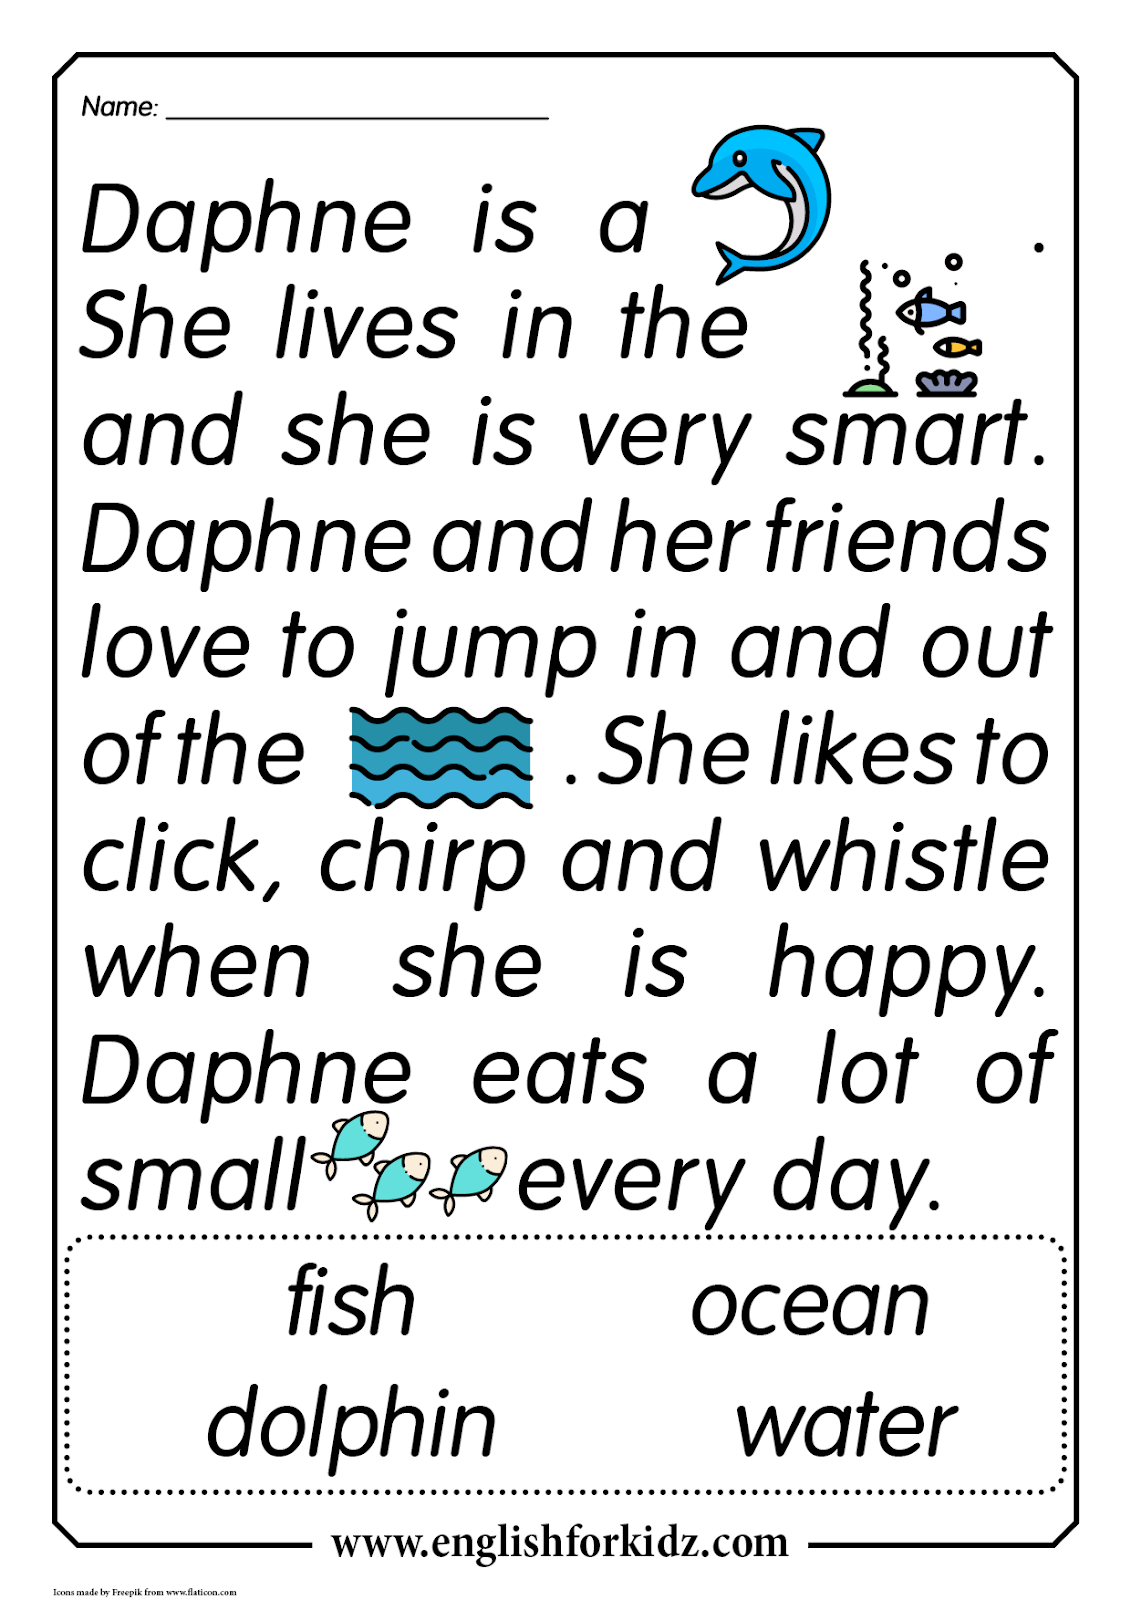 english-for-kids-step-by-step-reading-comprehension-worksheets-daphne-the-dolphin